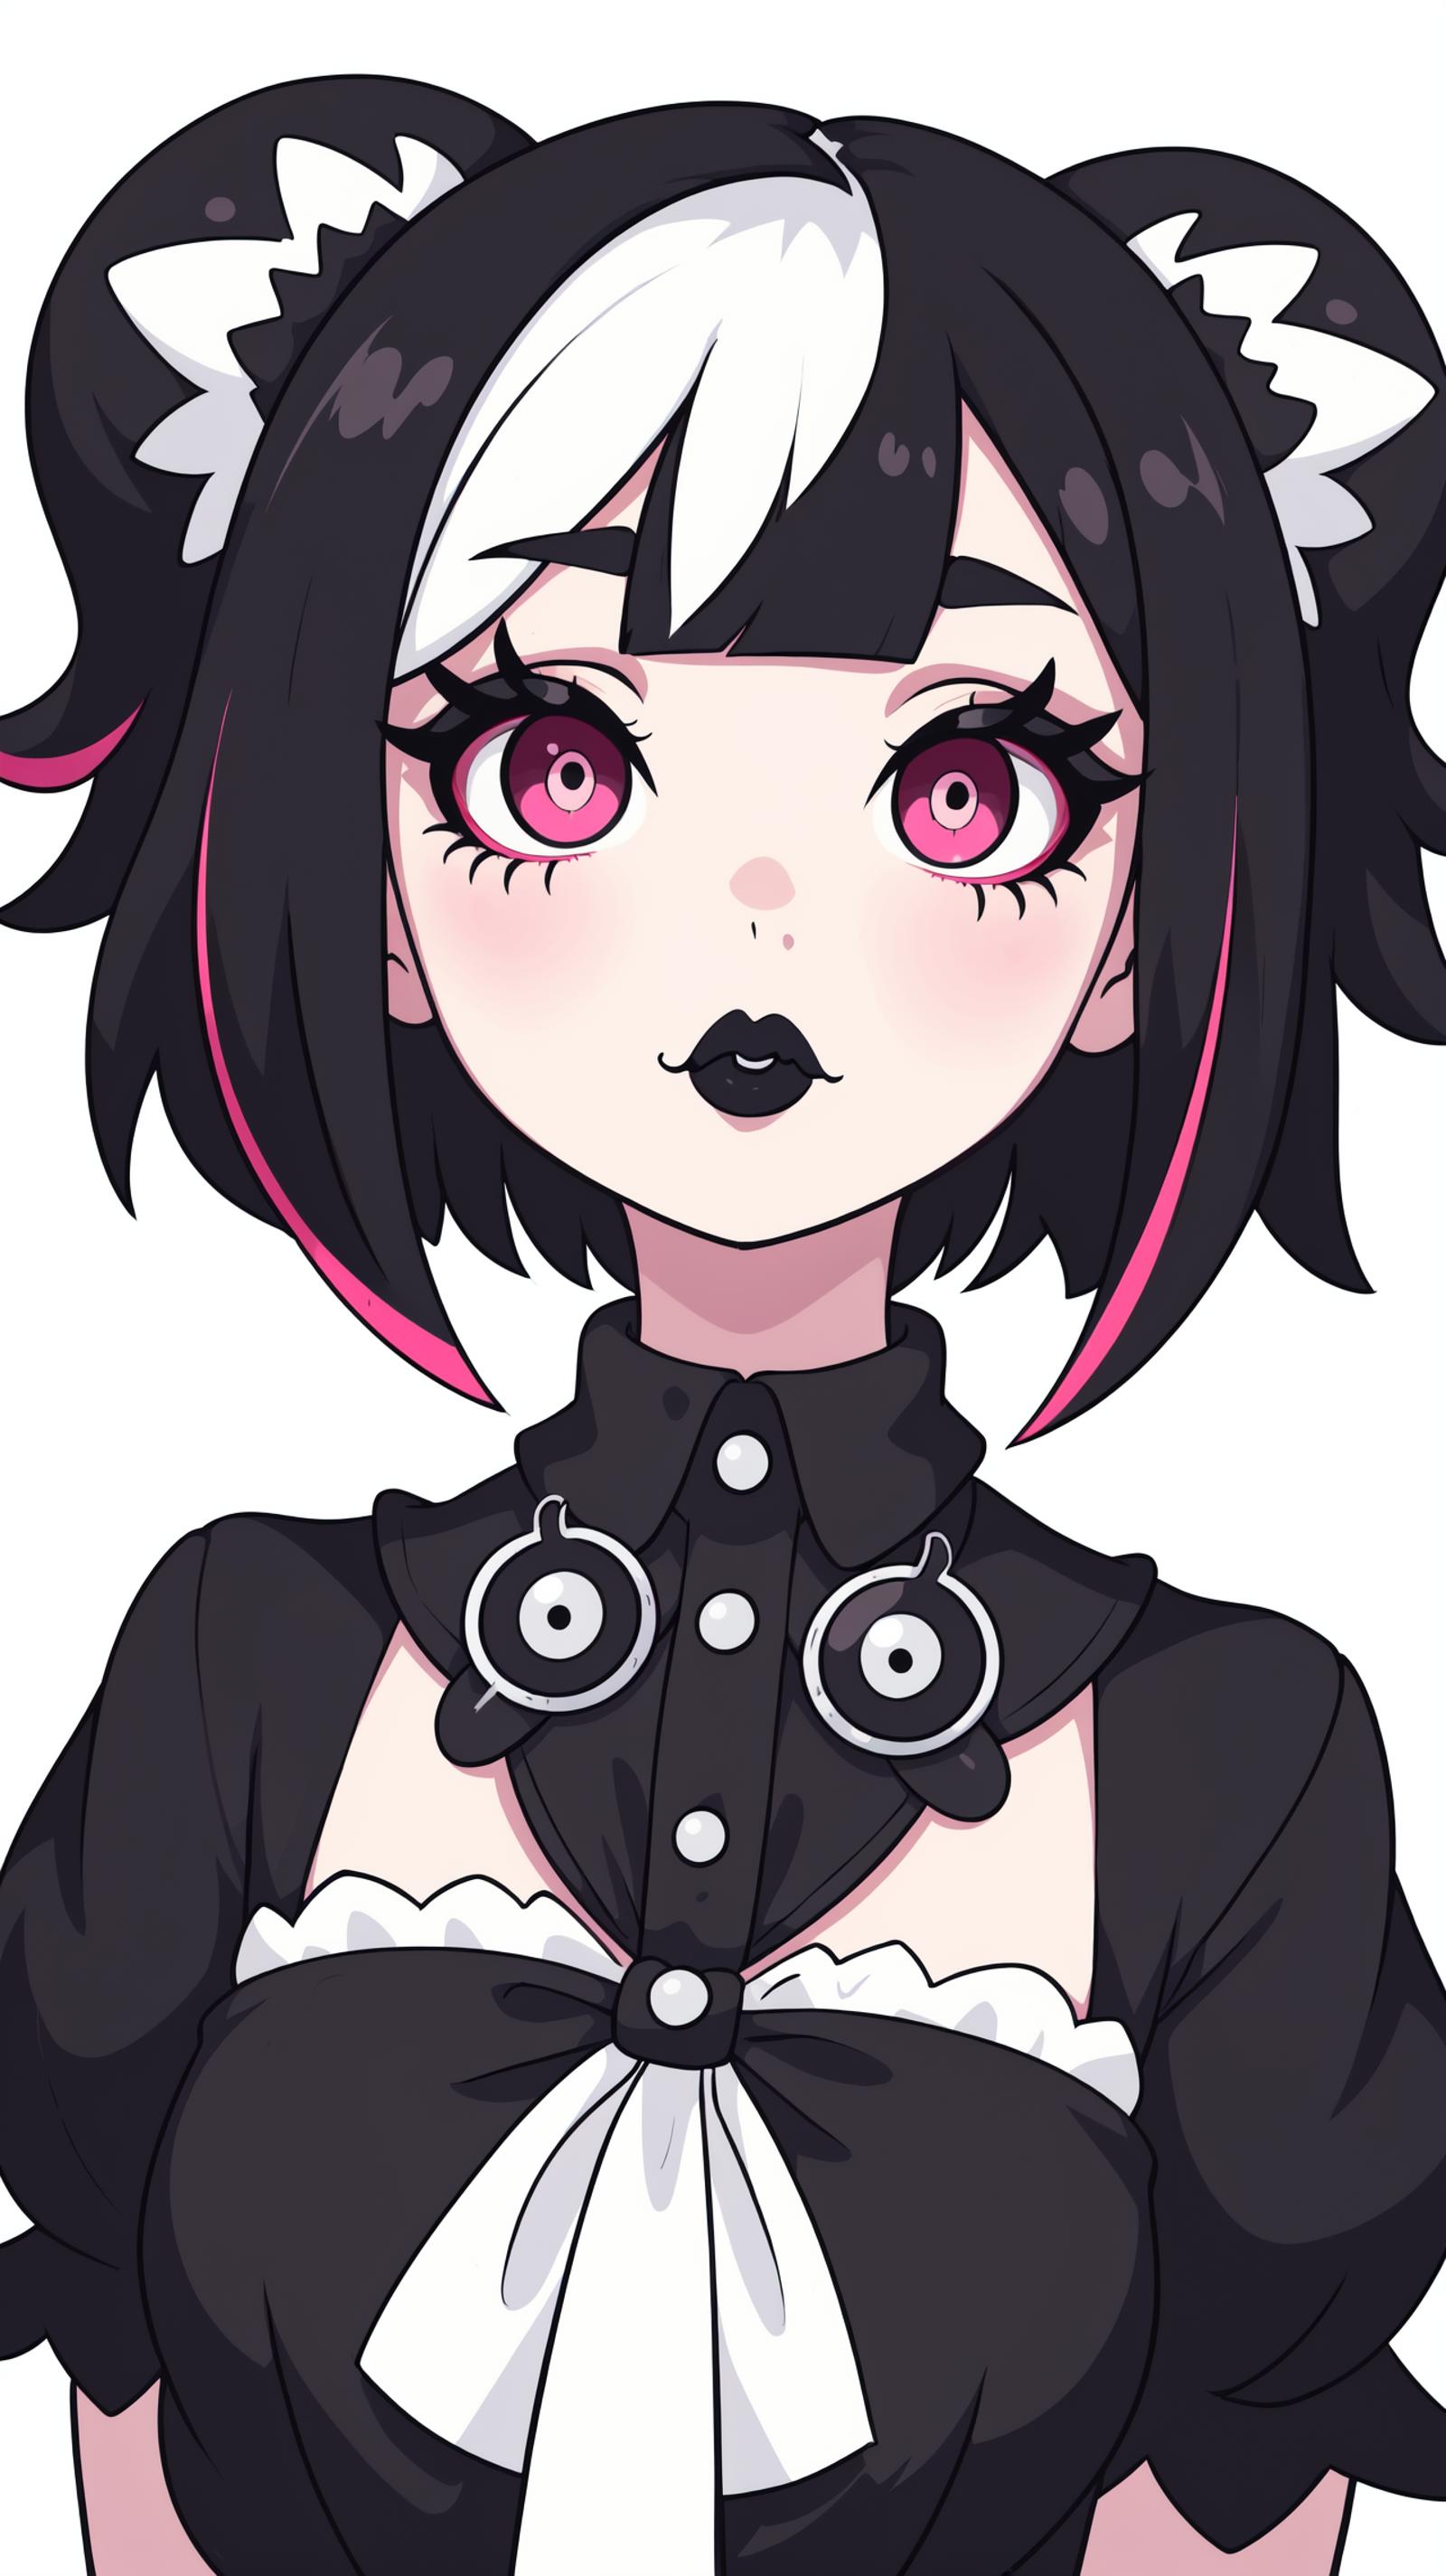 A character with pink eyes and a black lipstick, wearing a necklace and a black and white shirt.